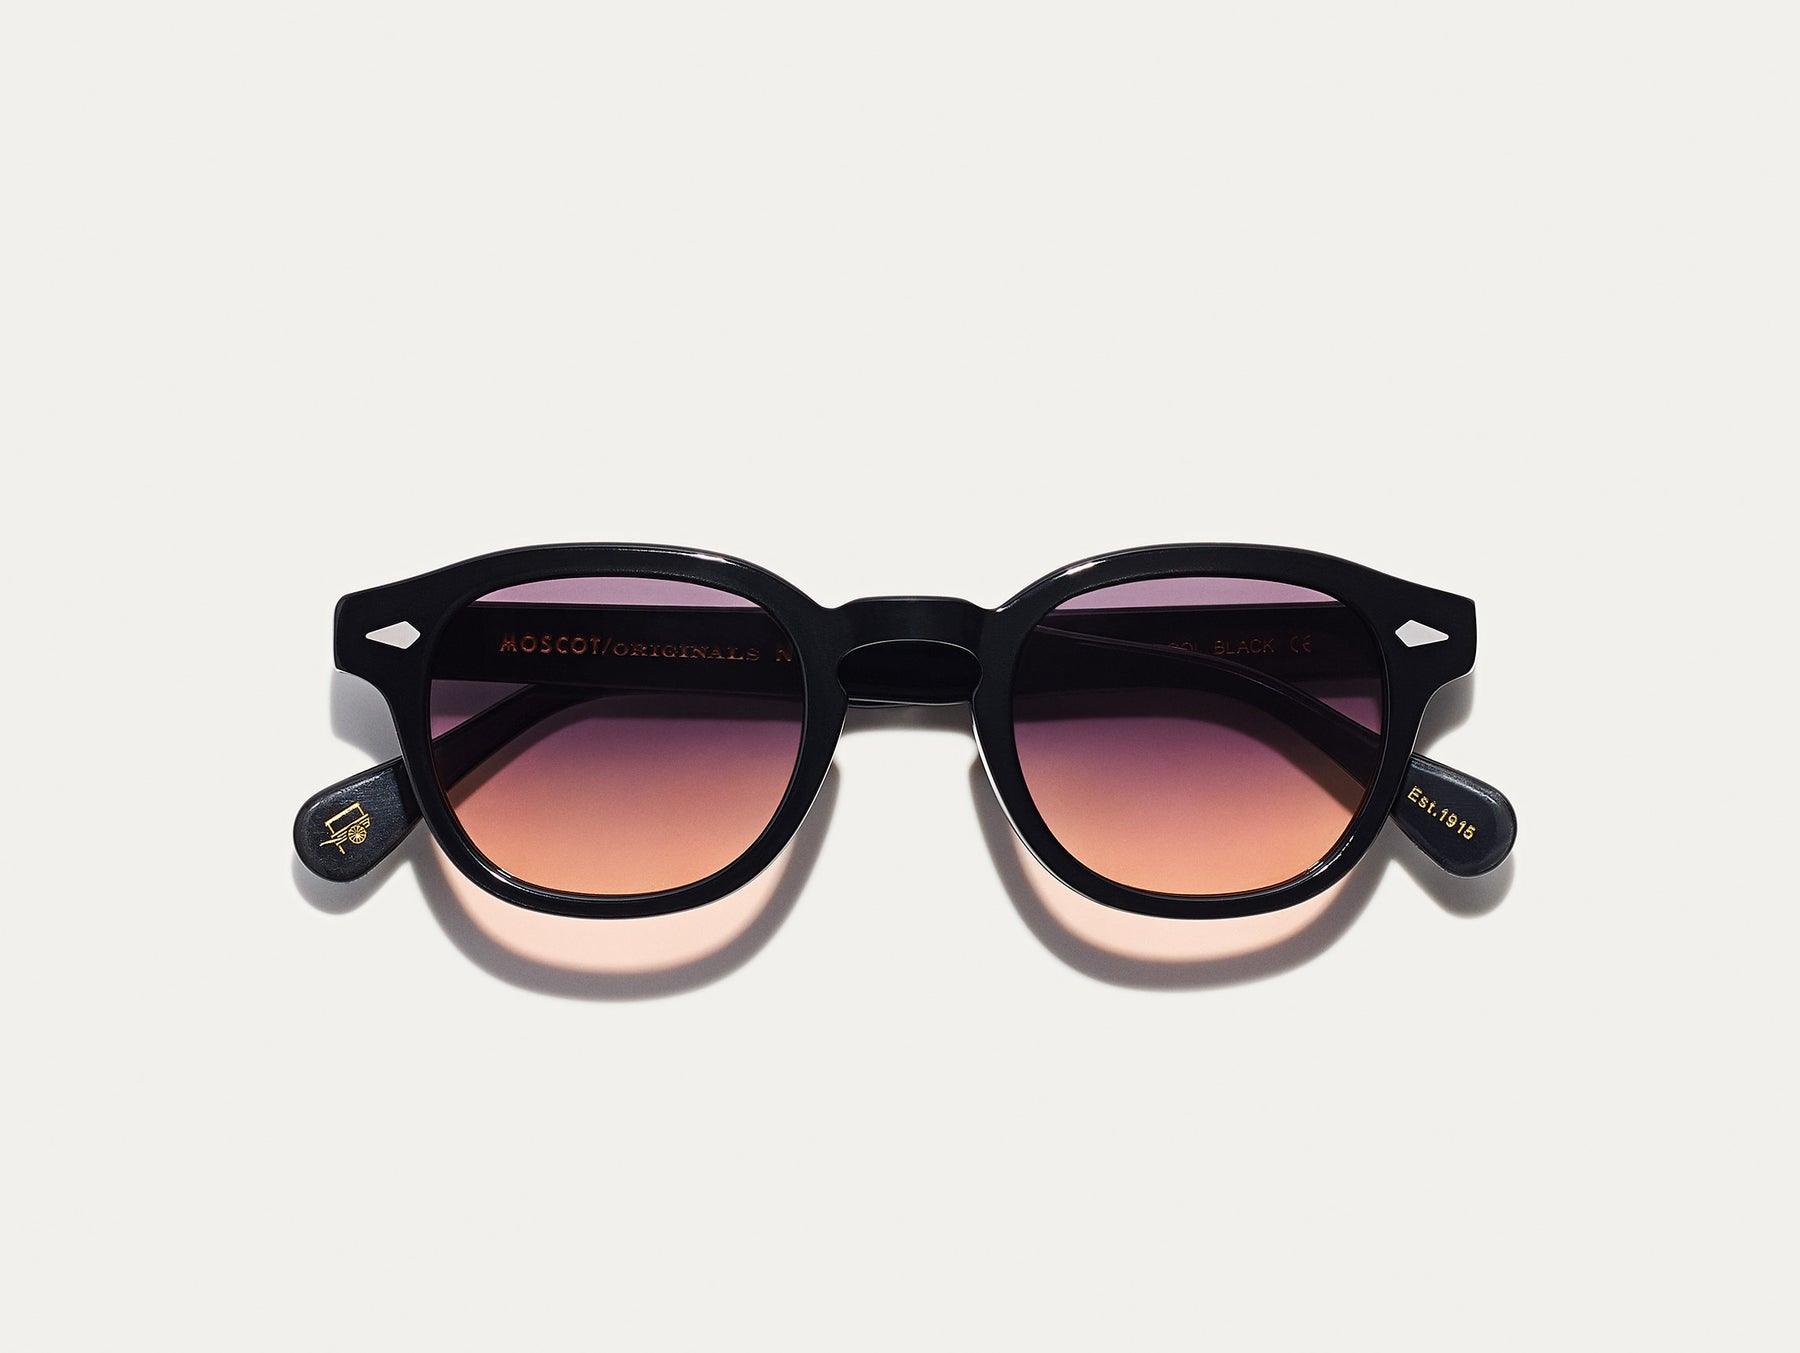 The LEMTOSH Black with City Lights Tinted Lenses